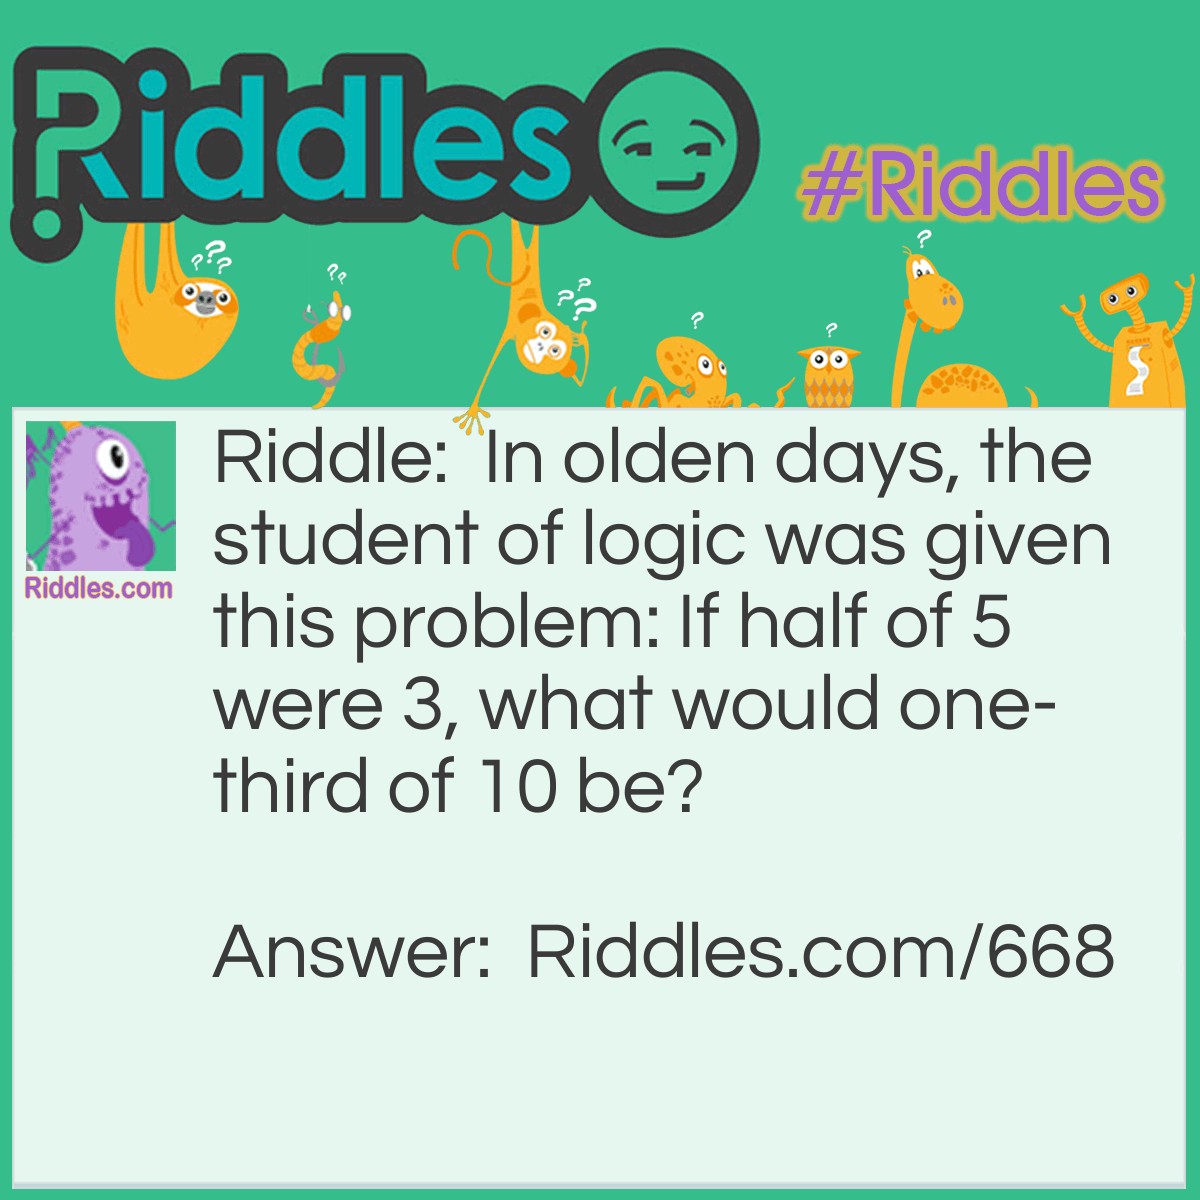 Riddle: In olden days, the student of logic was given this problem: If half of 5 were 3, what would one-third of 10 be? Answer: It would be 4.